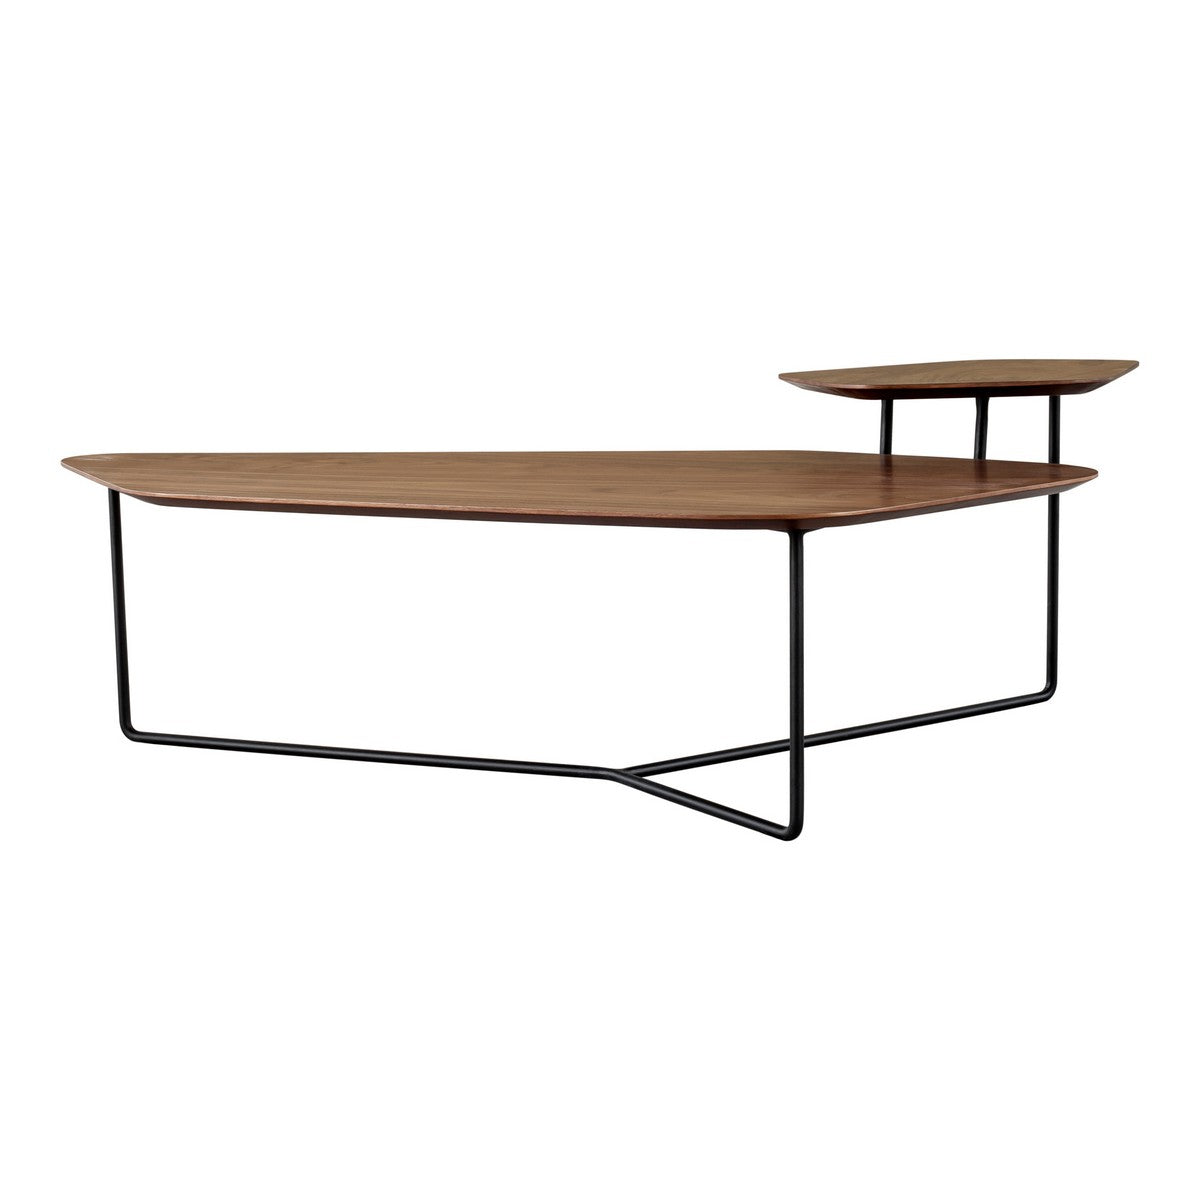 Moe's Home Collection Hexo Coffee Table Walnut - FJ-1003-03 - Moe's Home Collection - Coffee Tables - Minimal And Modern - 1